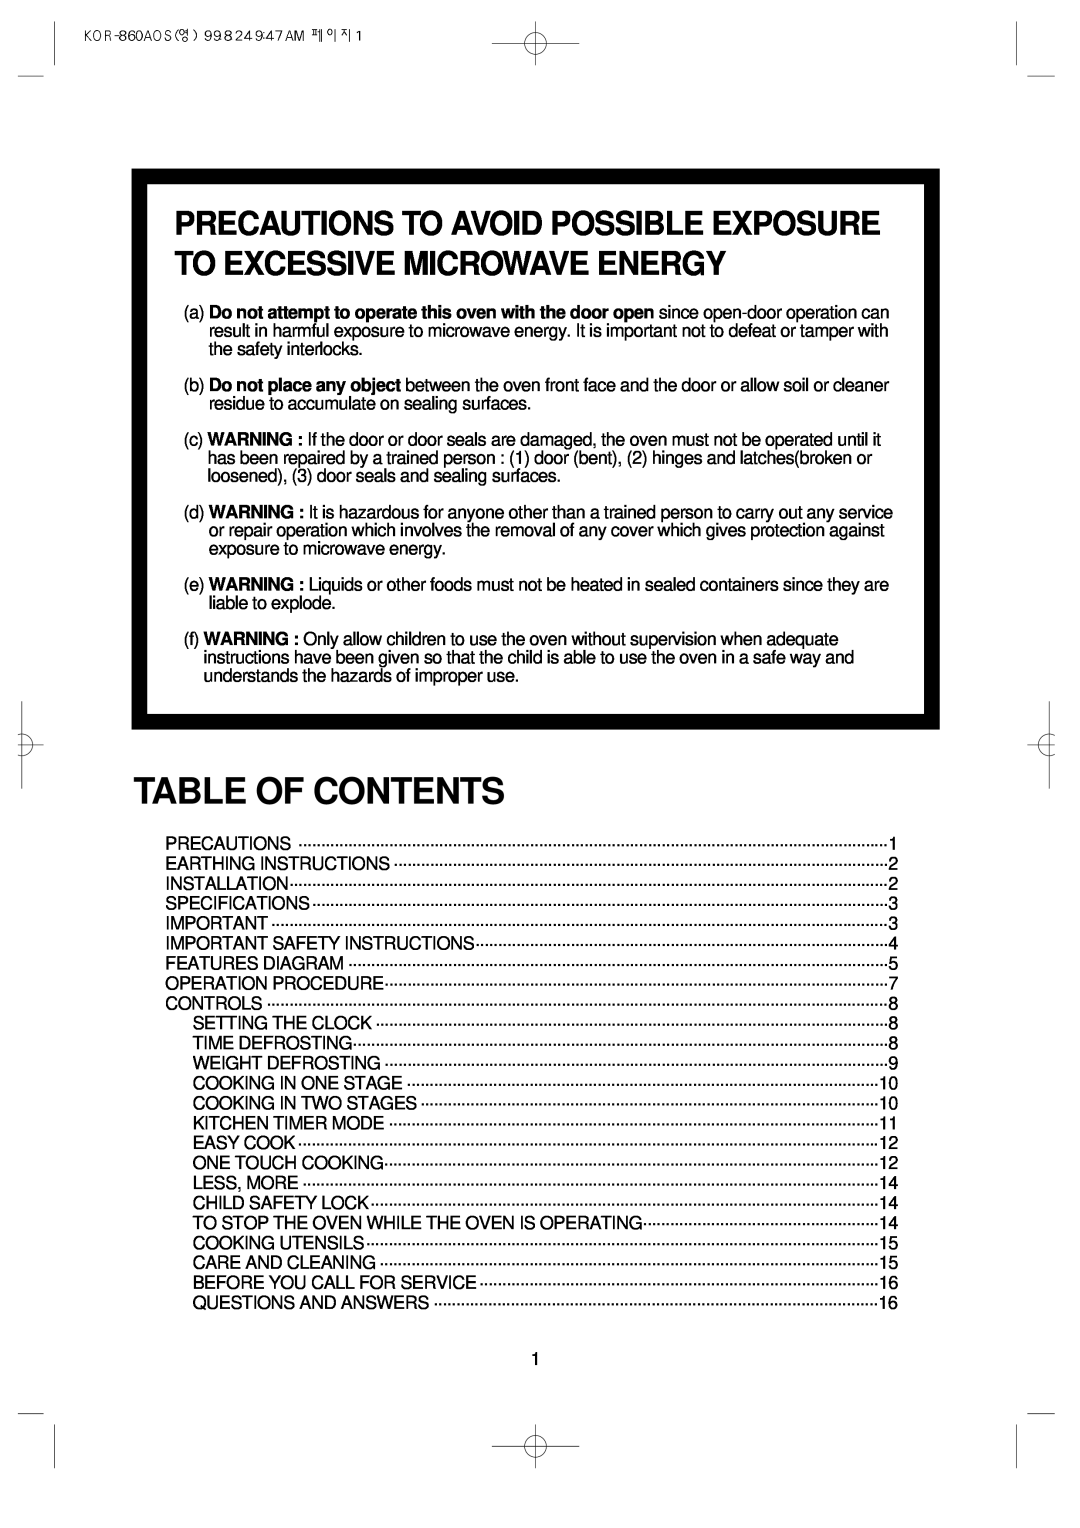 Daewoo KOR-860A manual Table Of Contents, Precautions To Avoid Possible Exposure To Excessive Microwave Energy 